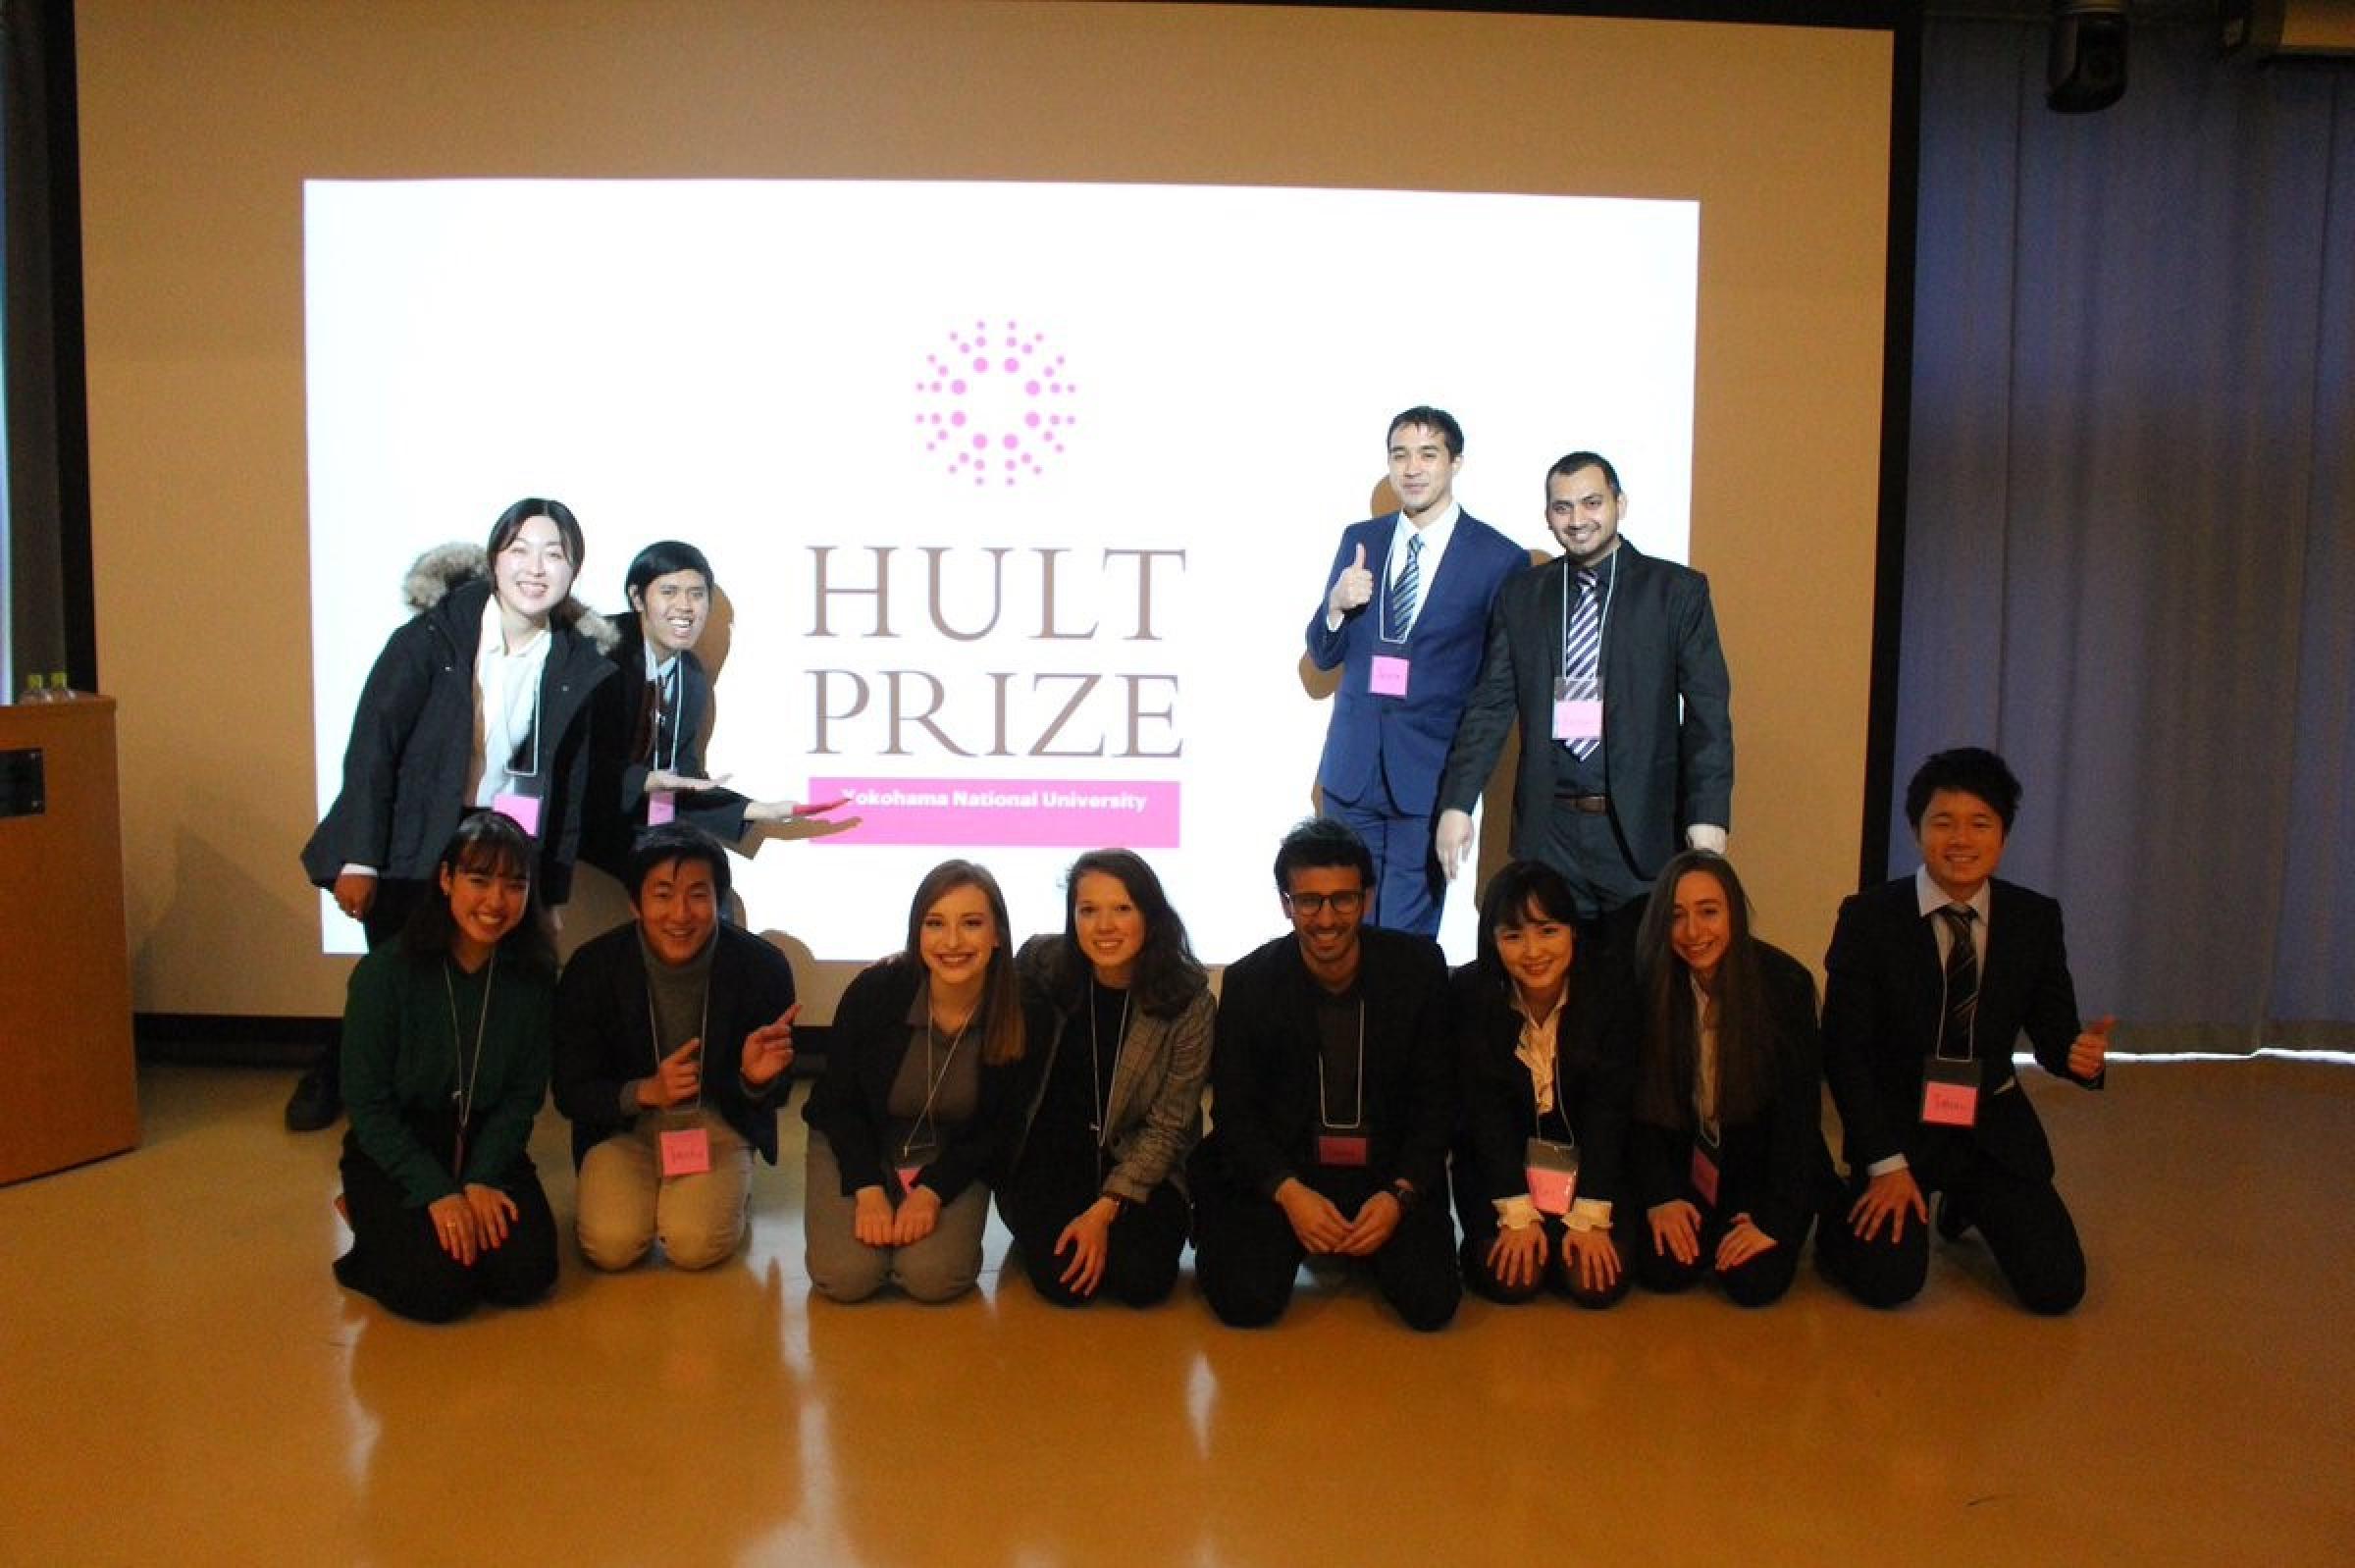 The Hult Prize Organizing Committee